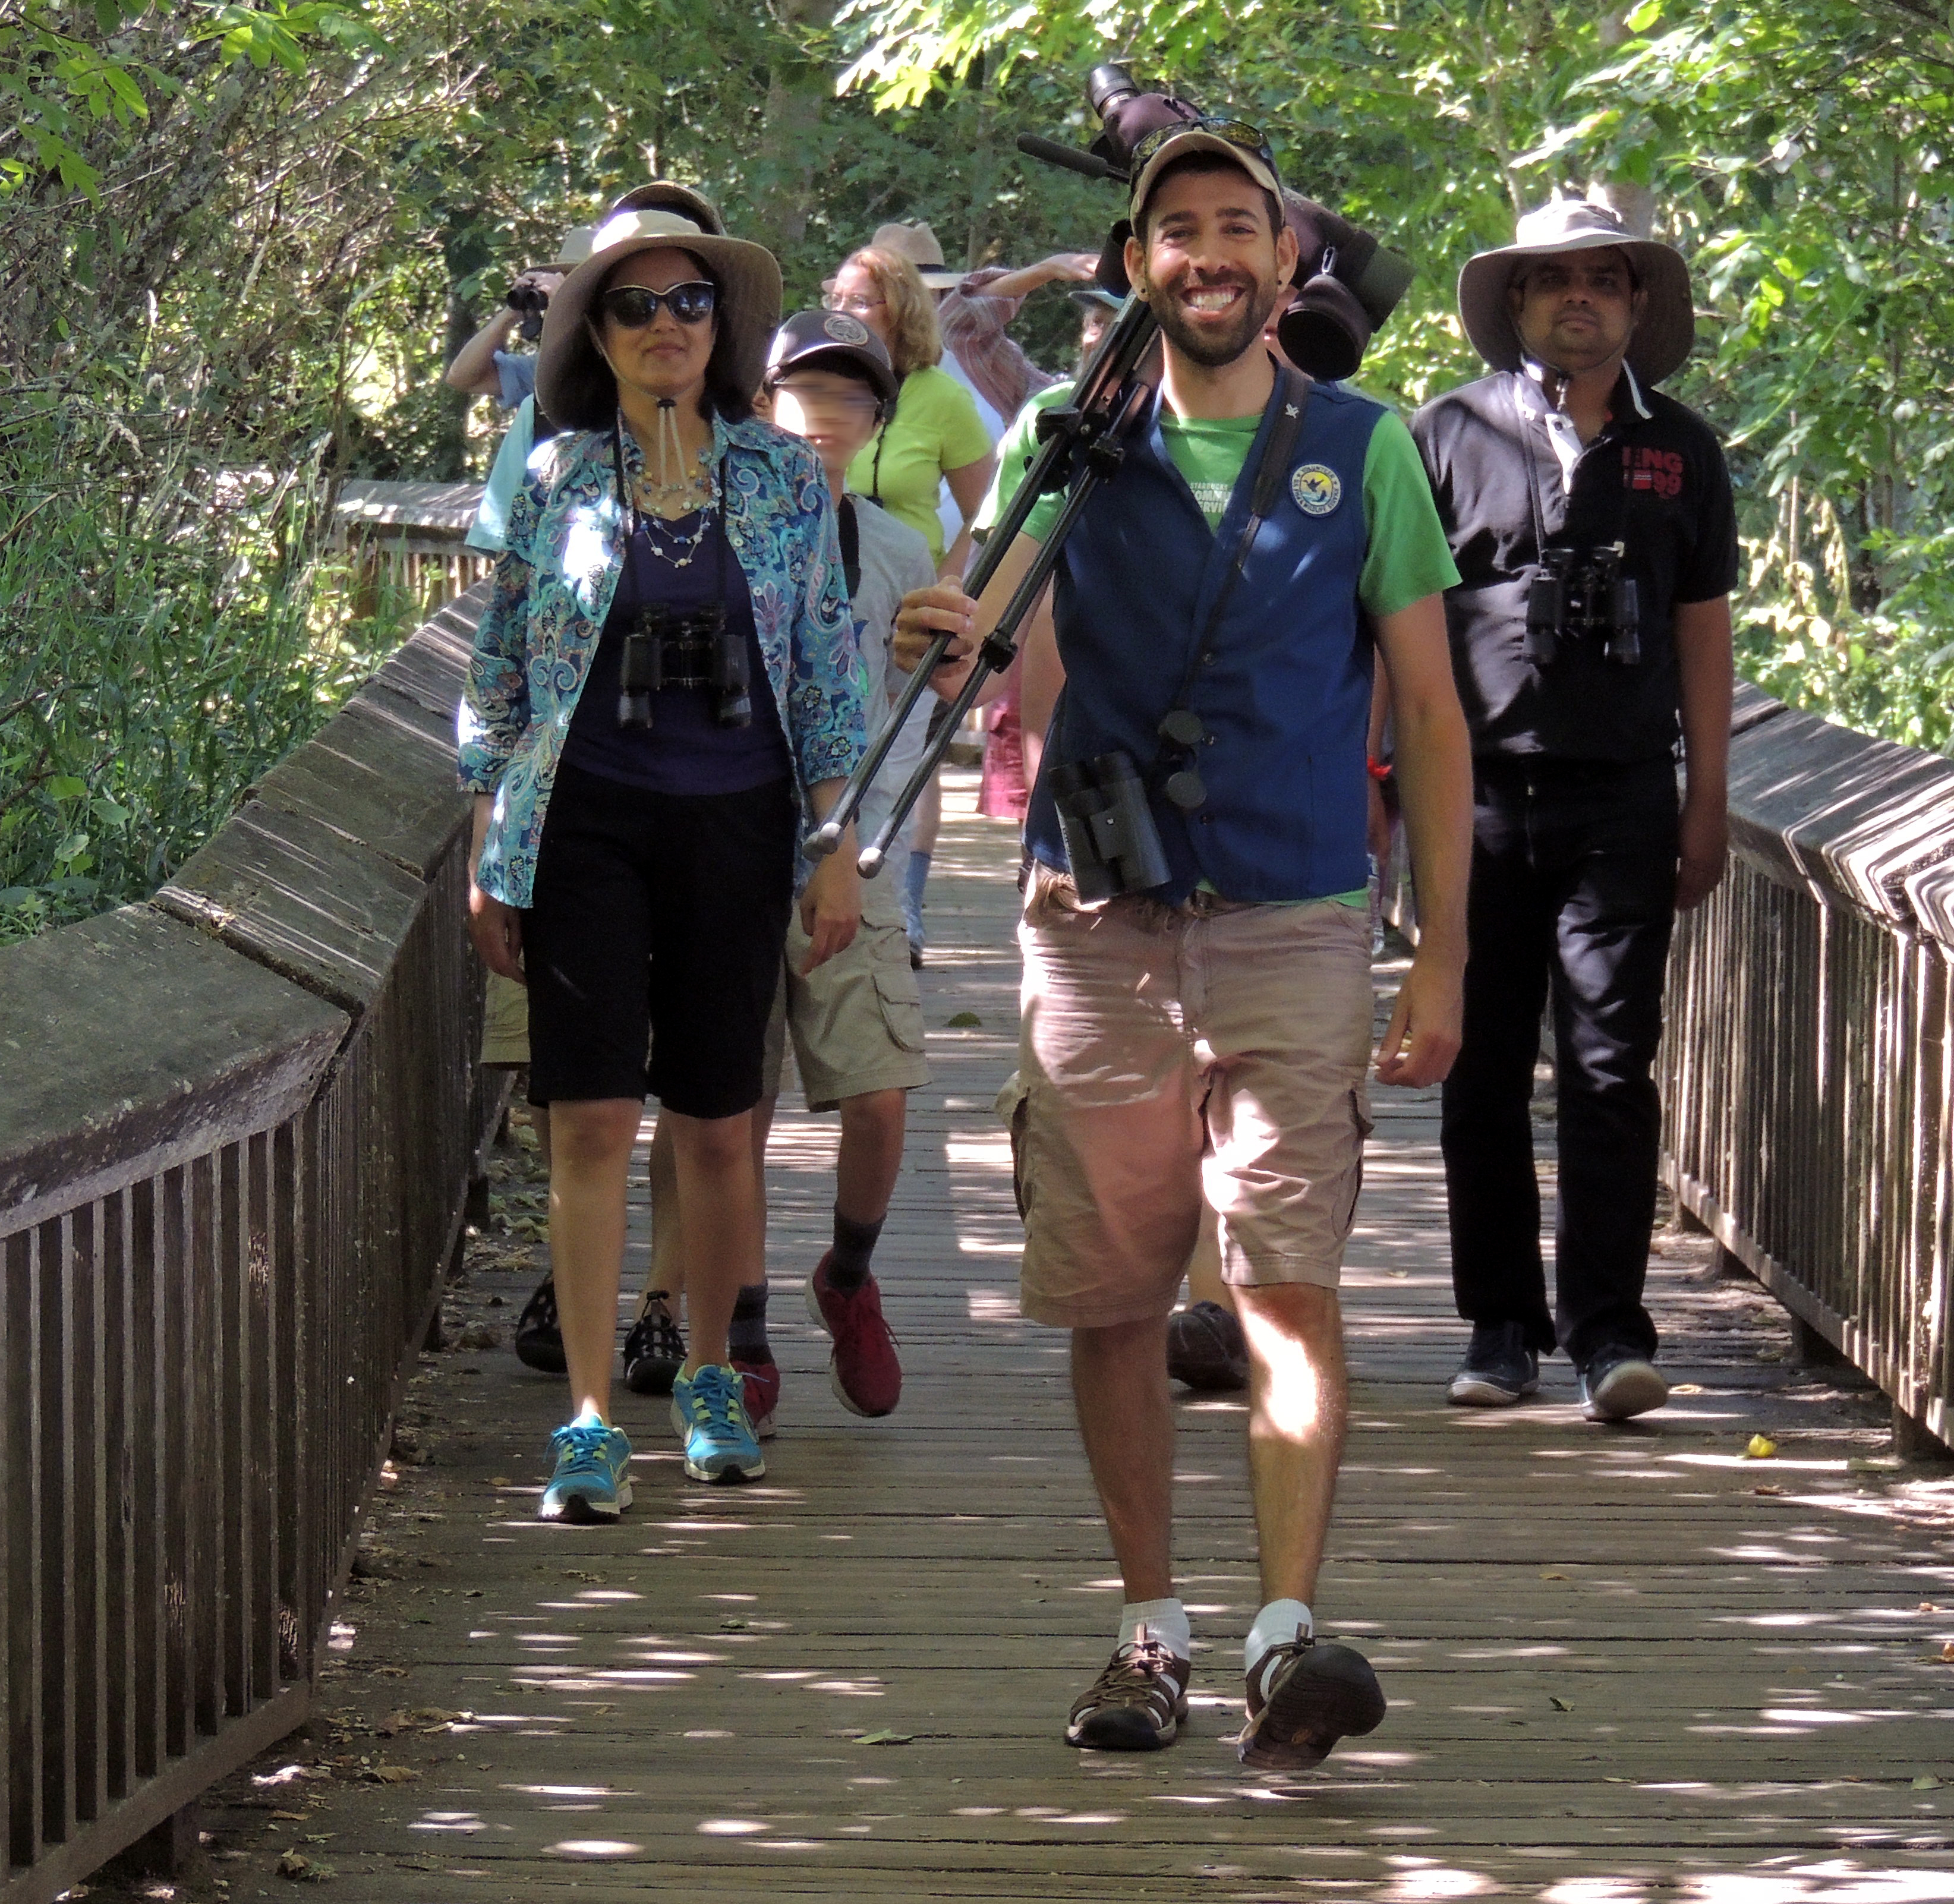 A grinning young man in a volunteer vest and shorts with a scope over his shoulder leads a group of visitors in summer wear along a boardwalk trail.